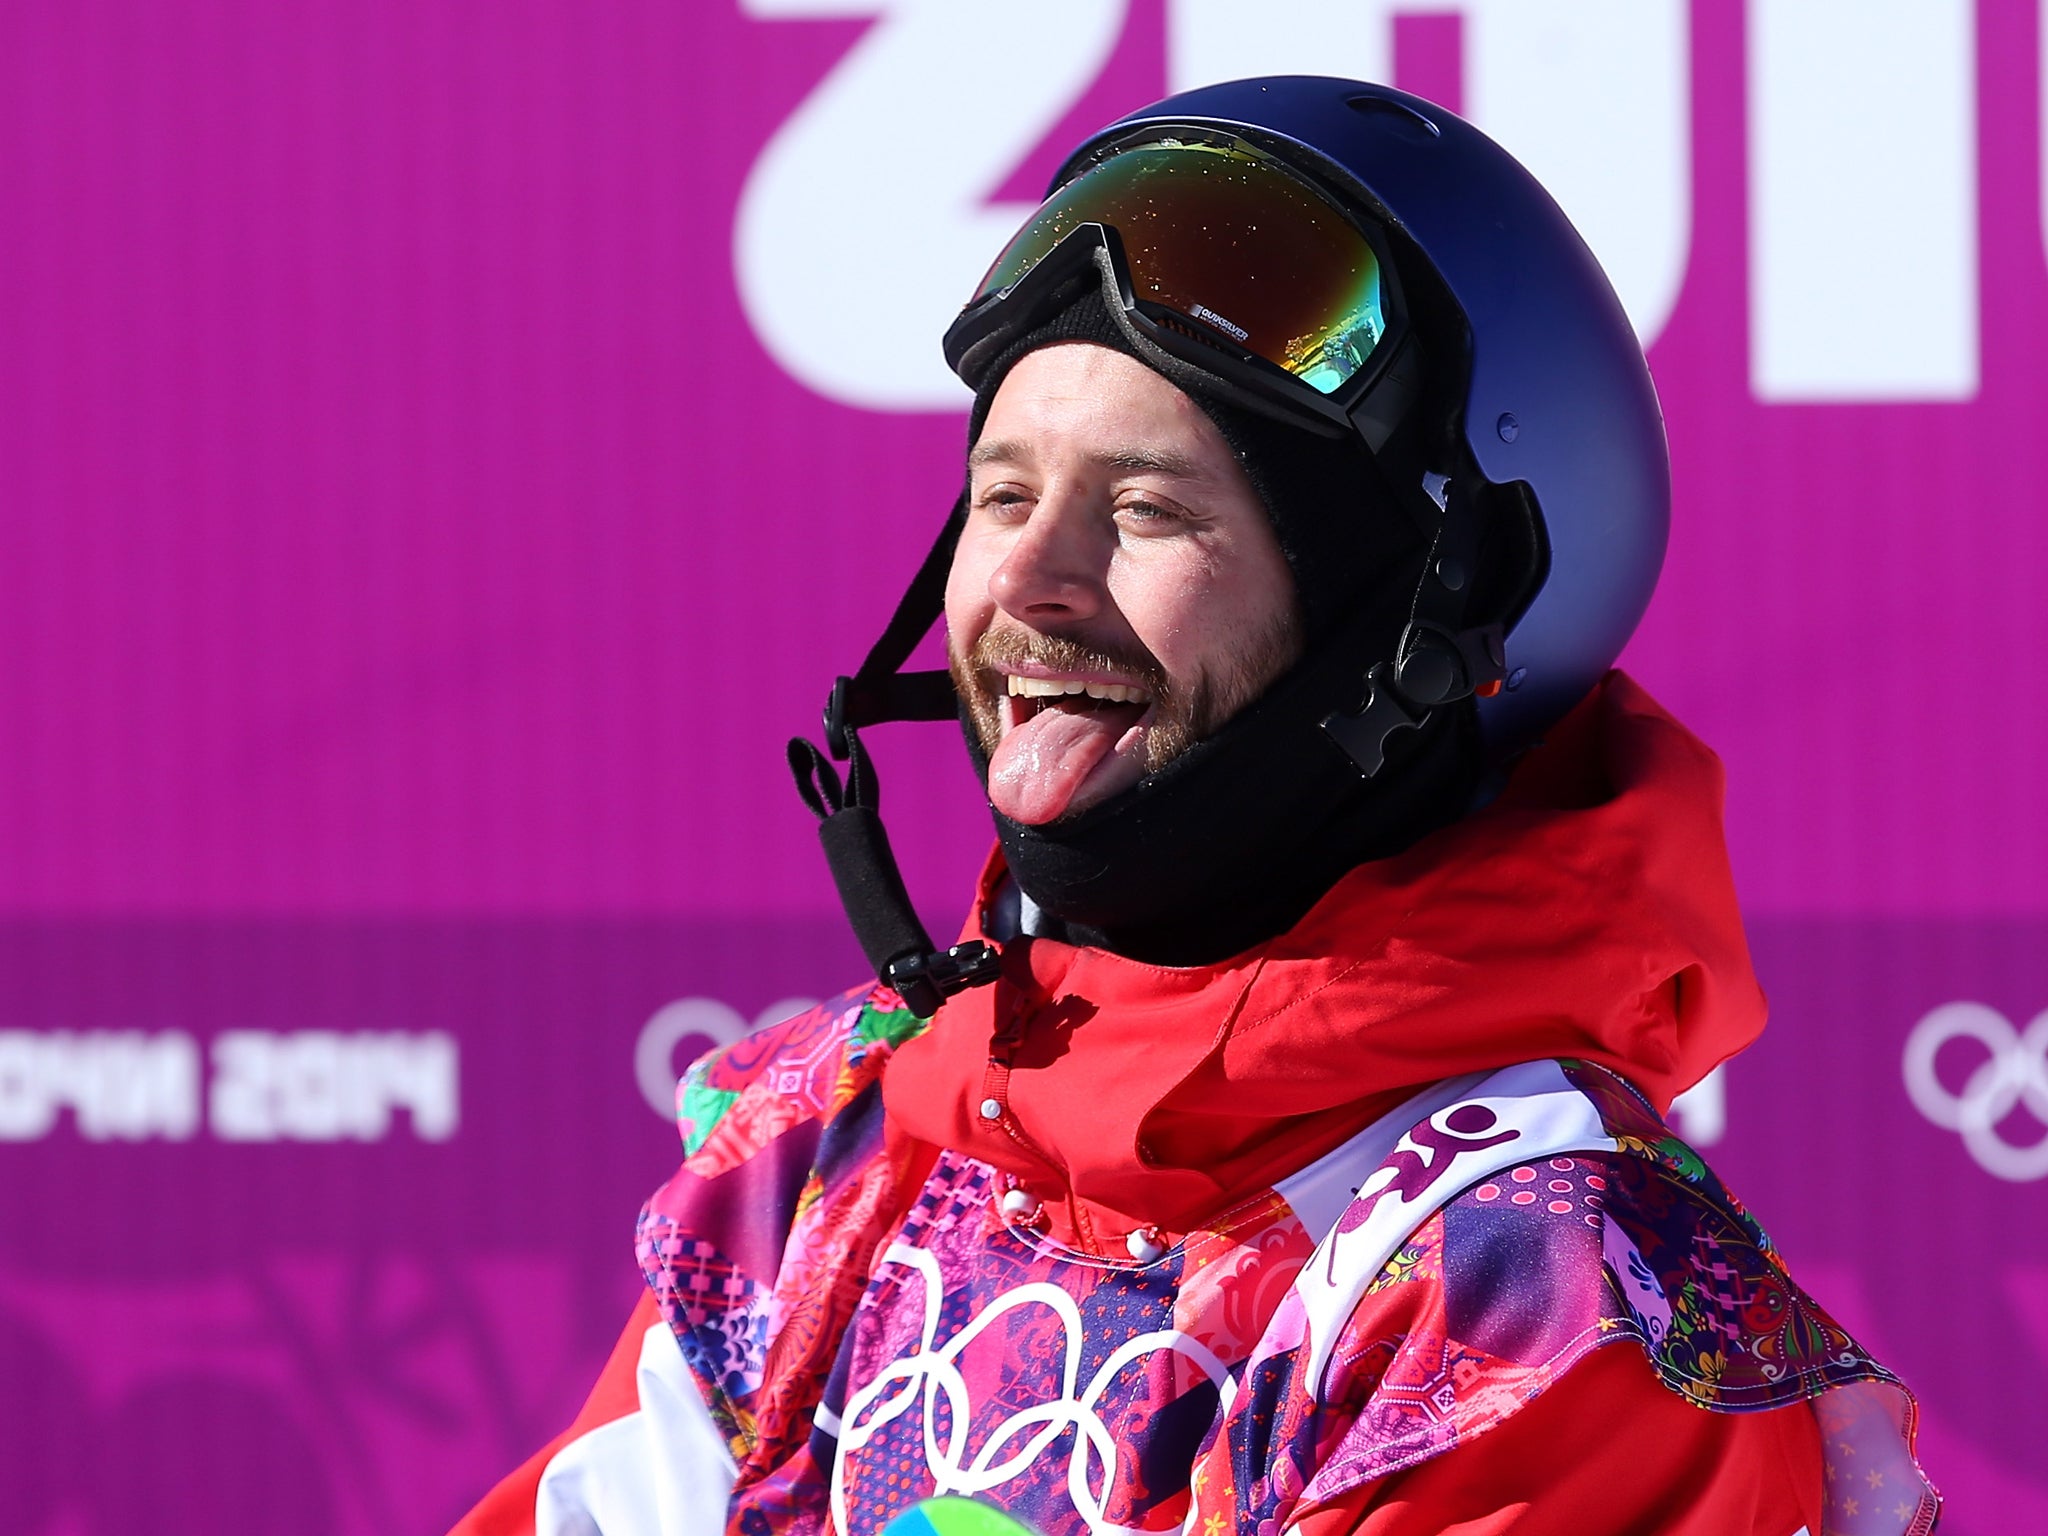 Billy Morgan reacts after his second run in the snowboard slopestyle final